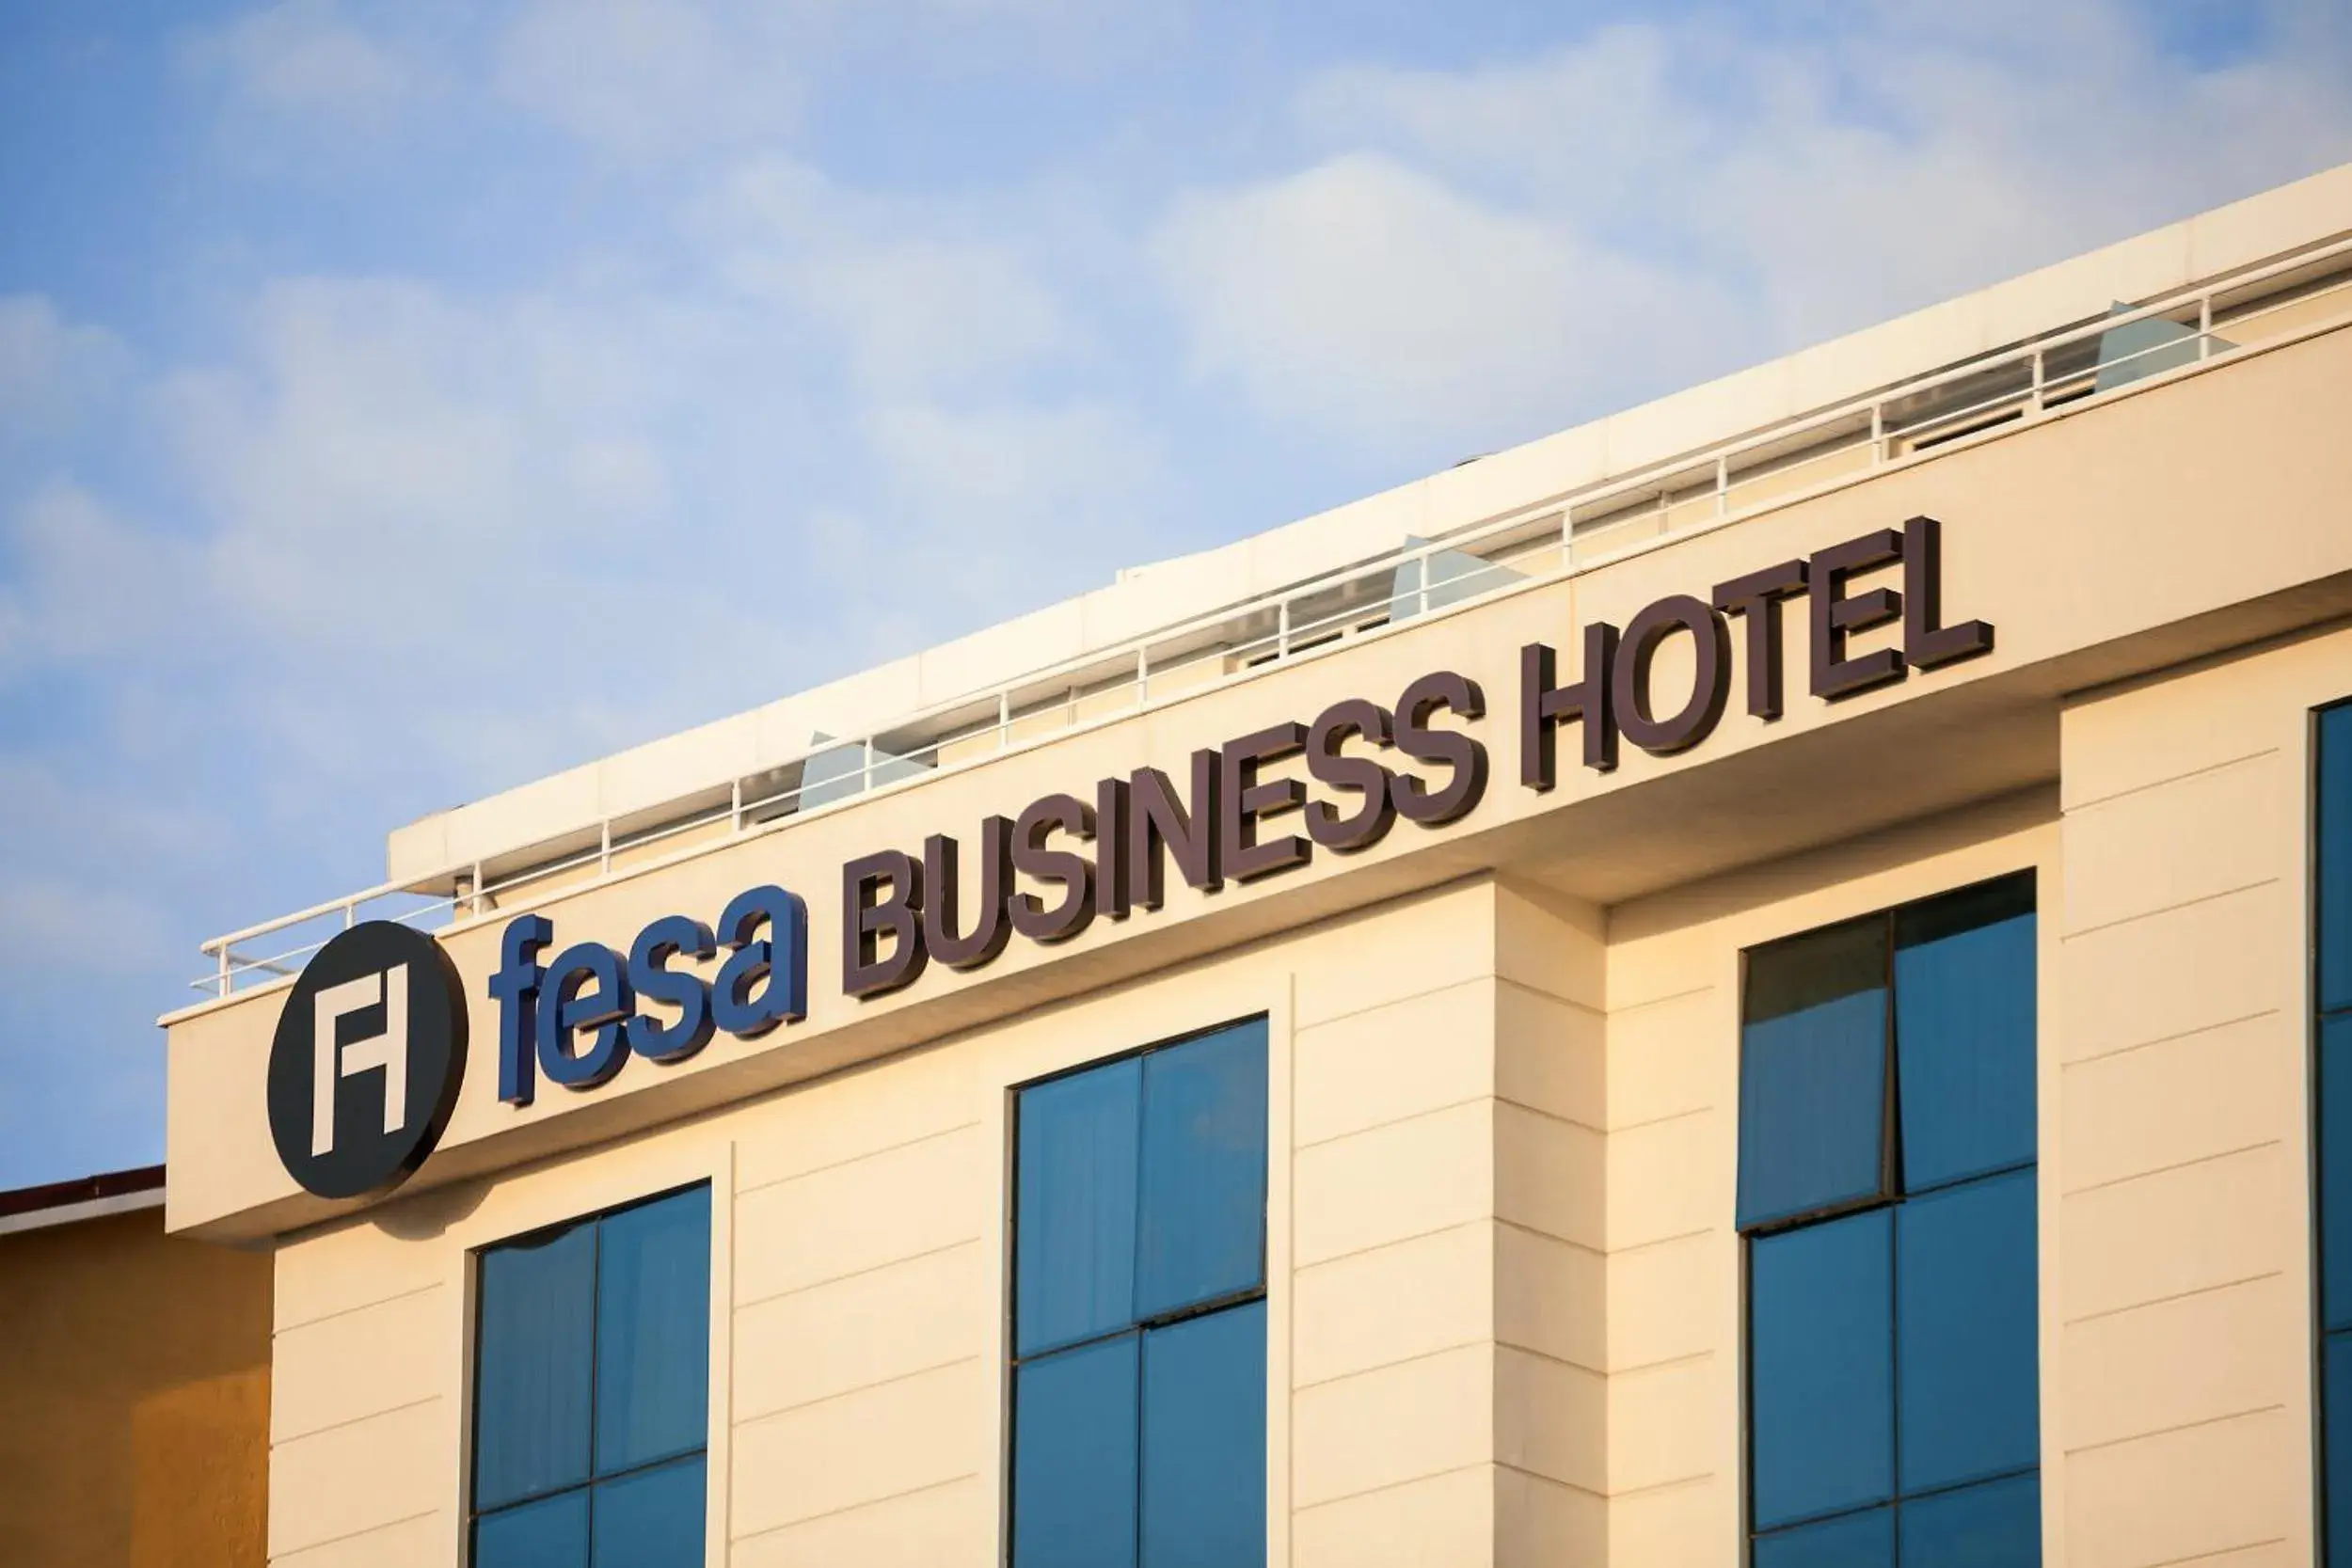 Day, Property Building in Fesa Business Hotel